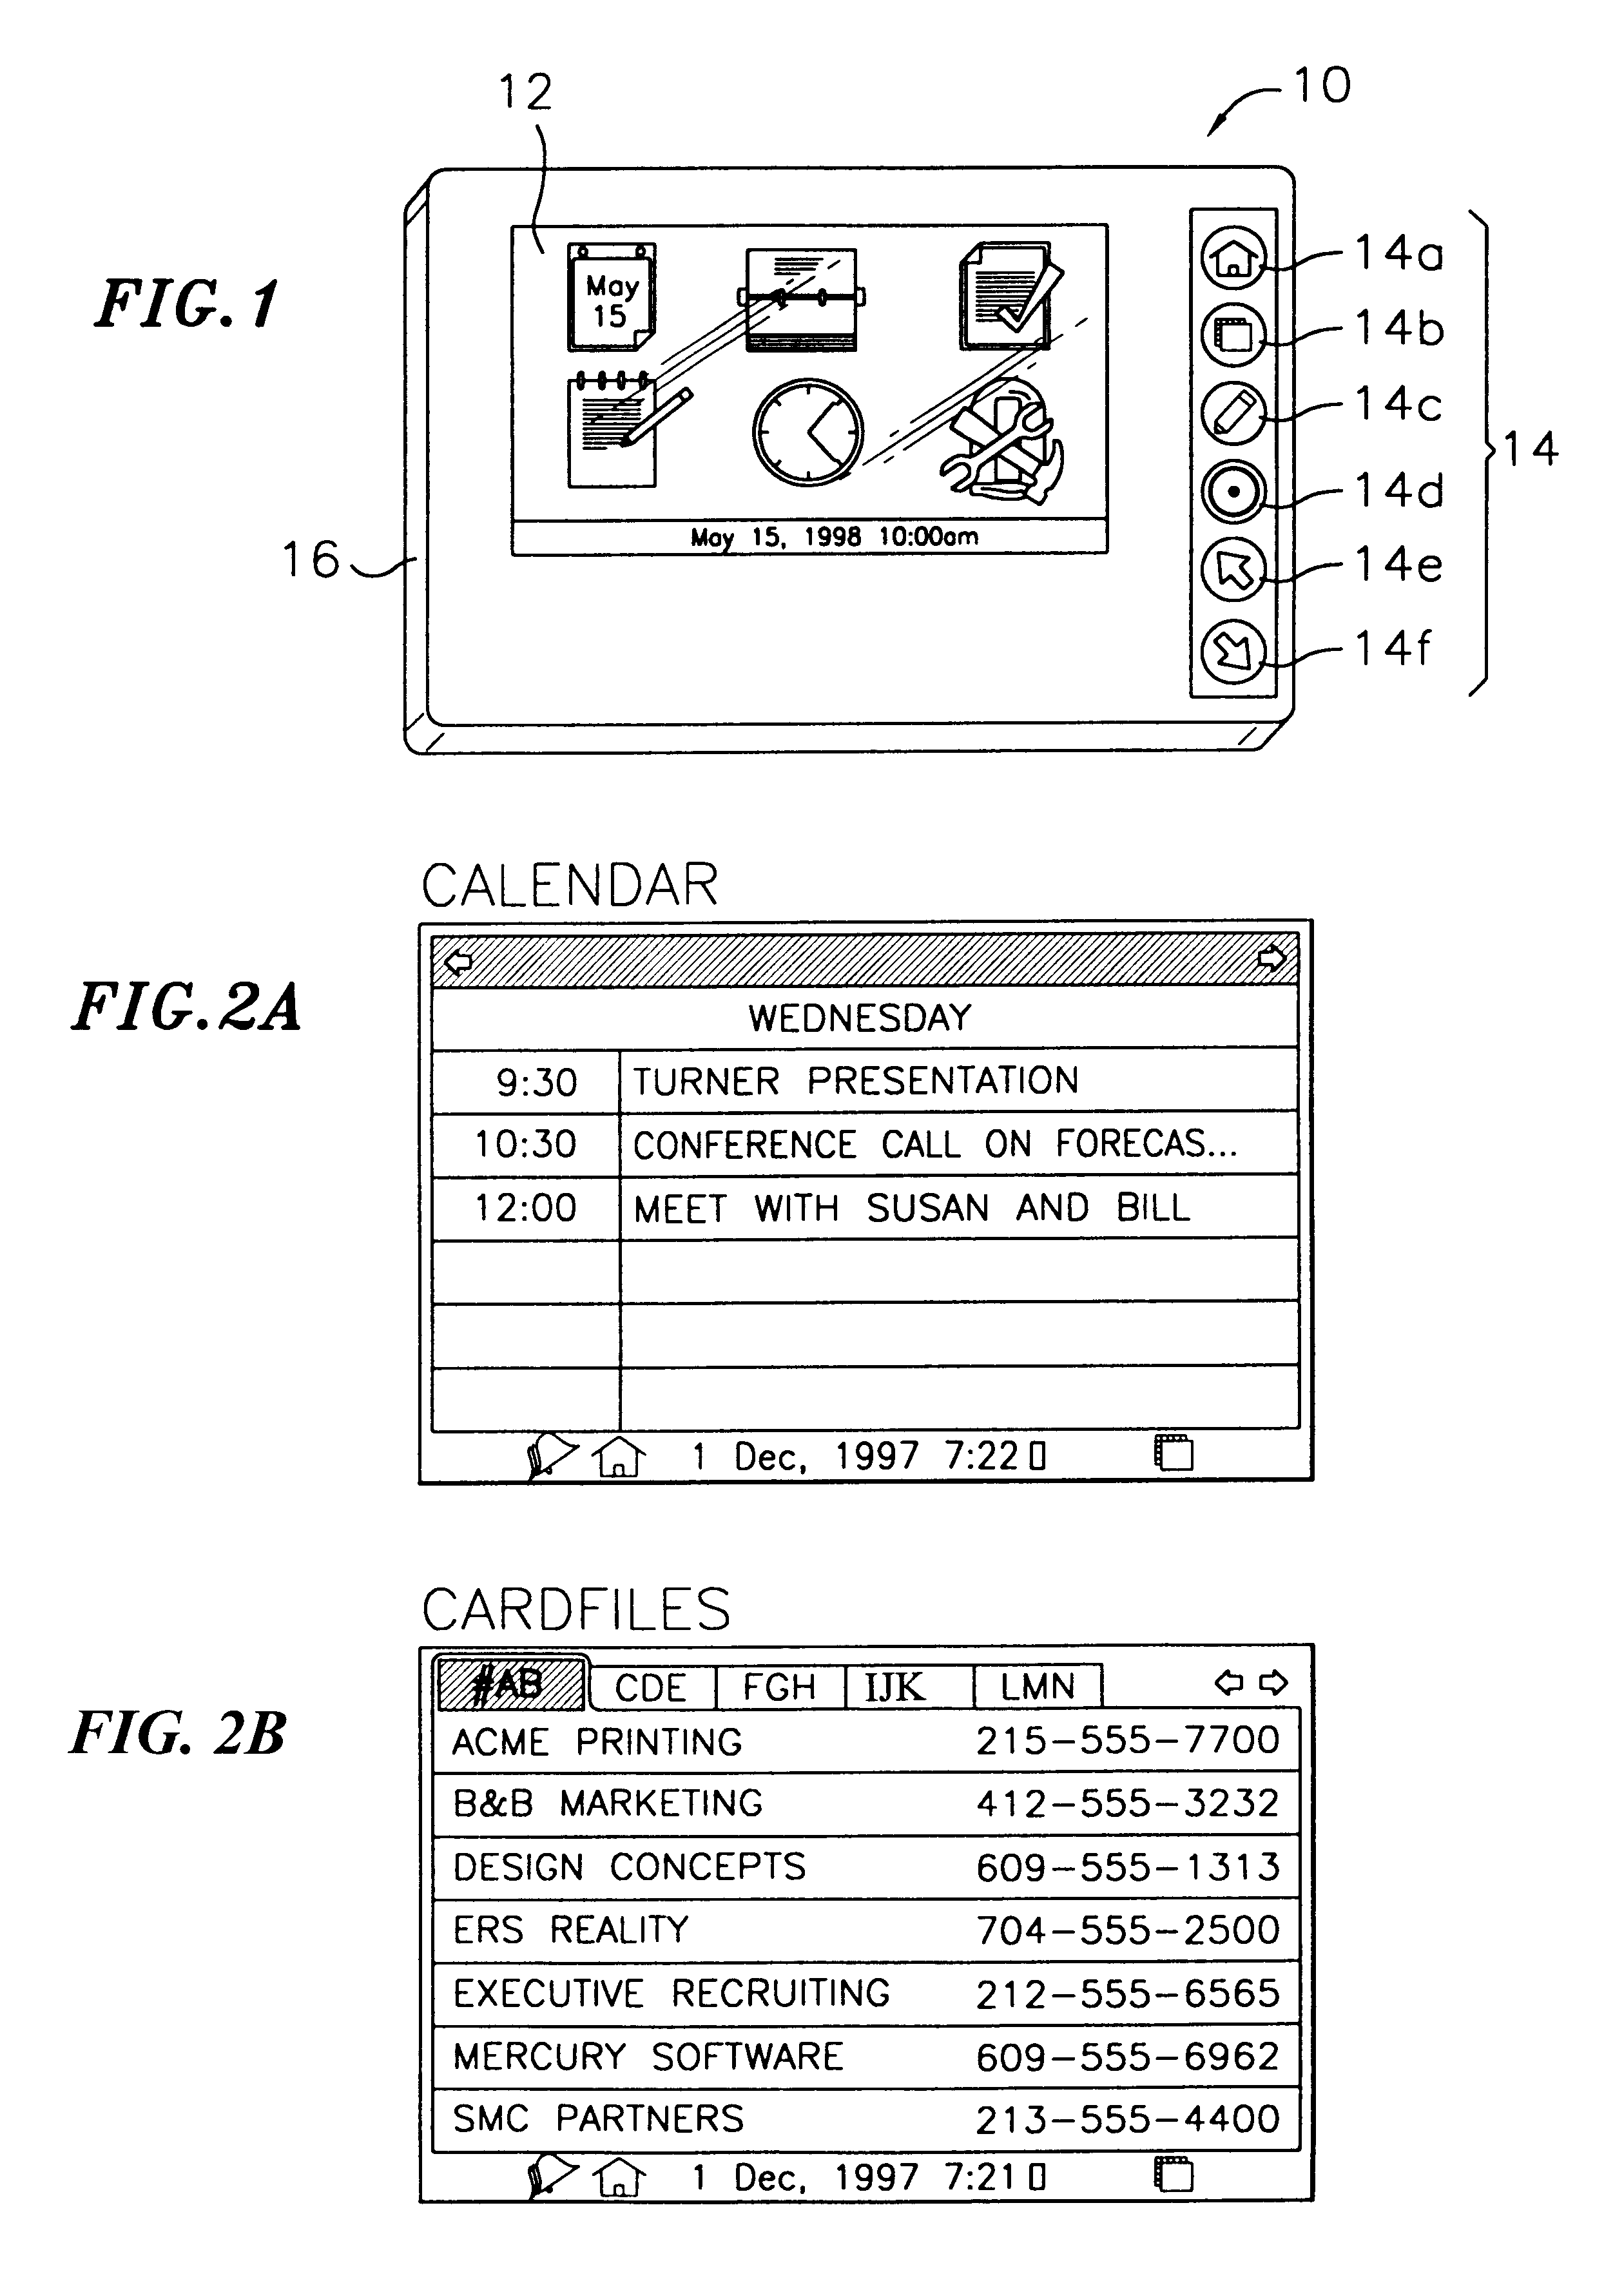 Personal information device and method for downloading reprogramming data from a computer to the personal information device via the PCMCIA port or through a docking station with baud rate conversion means